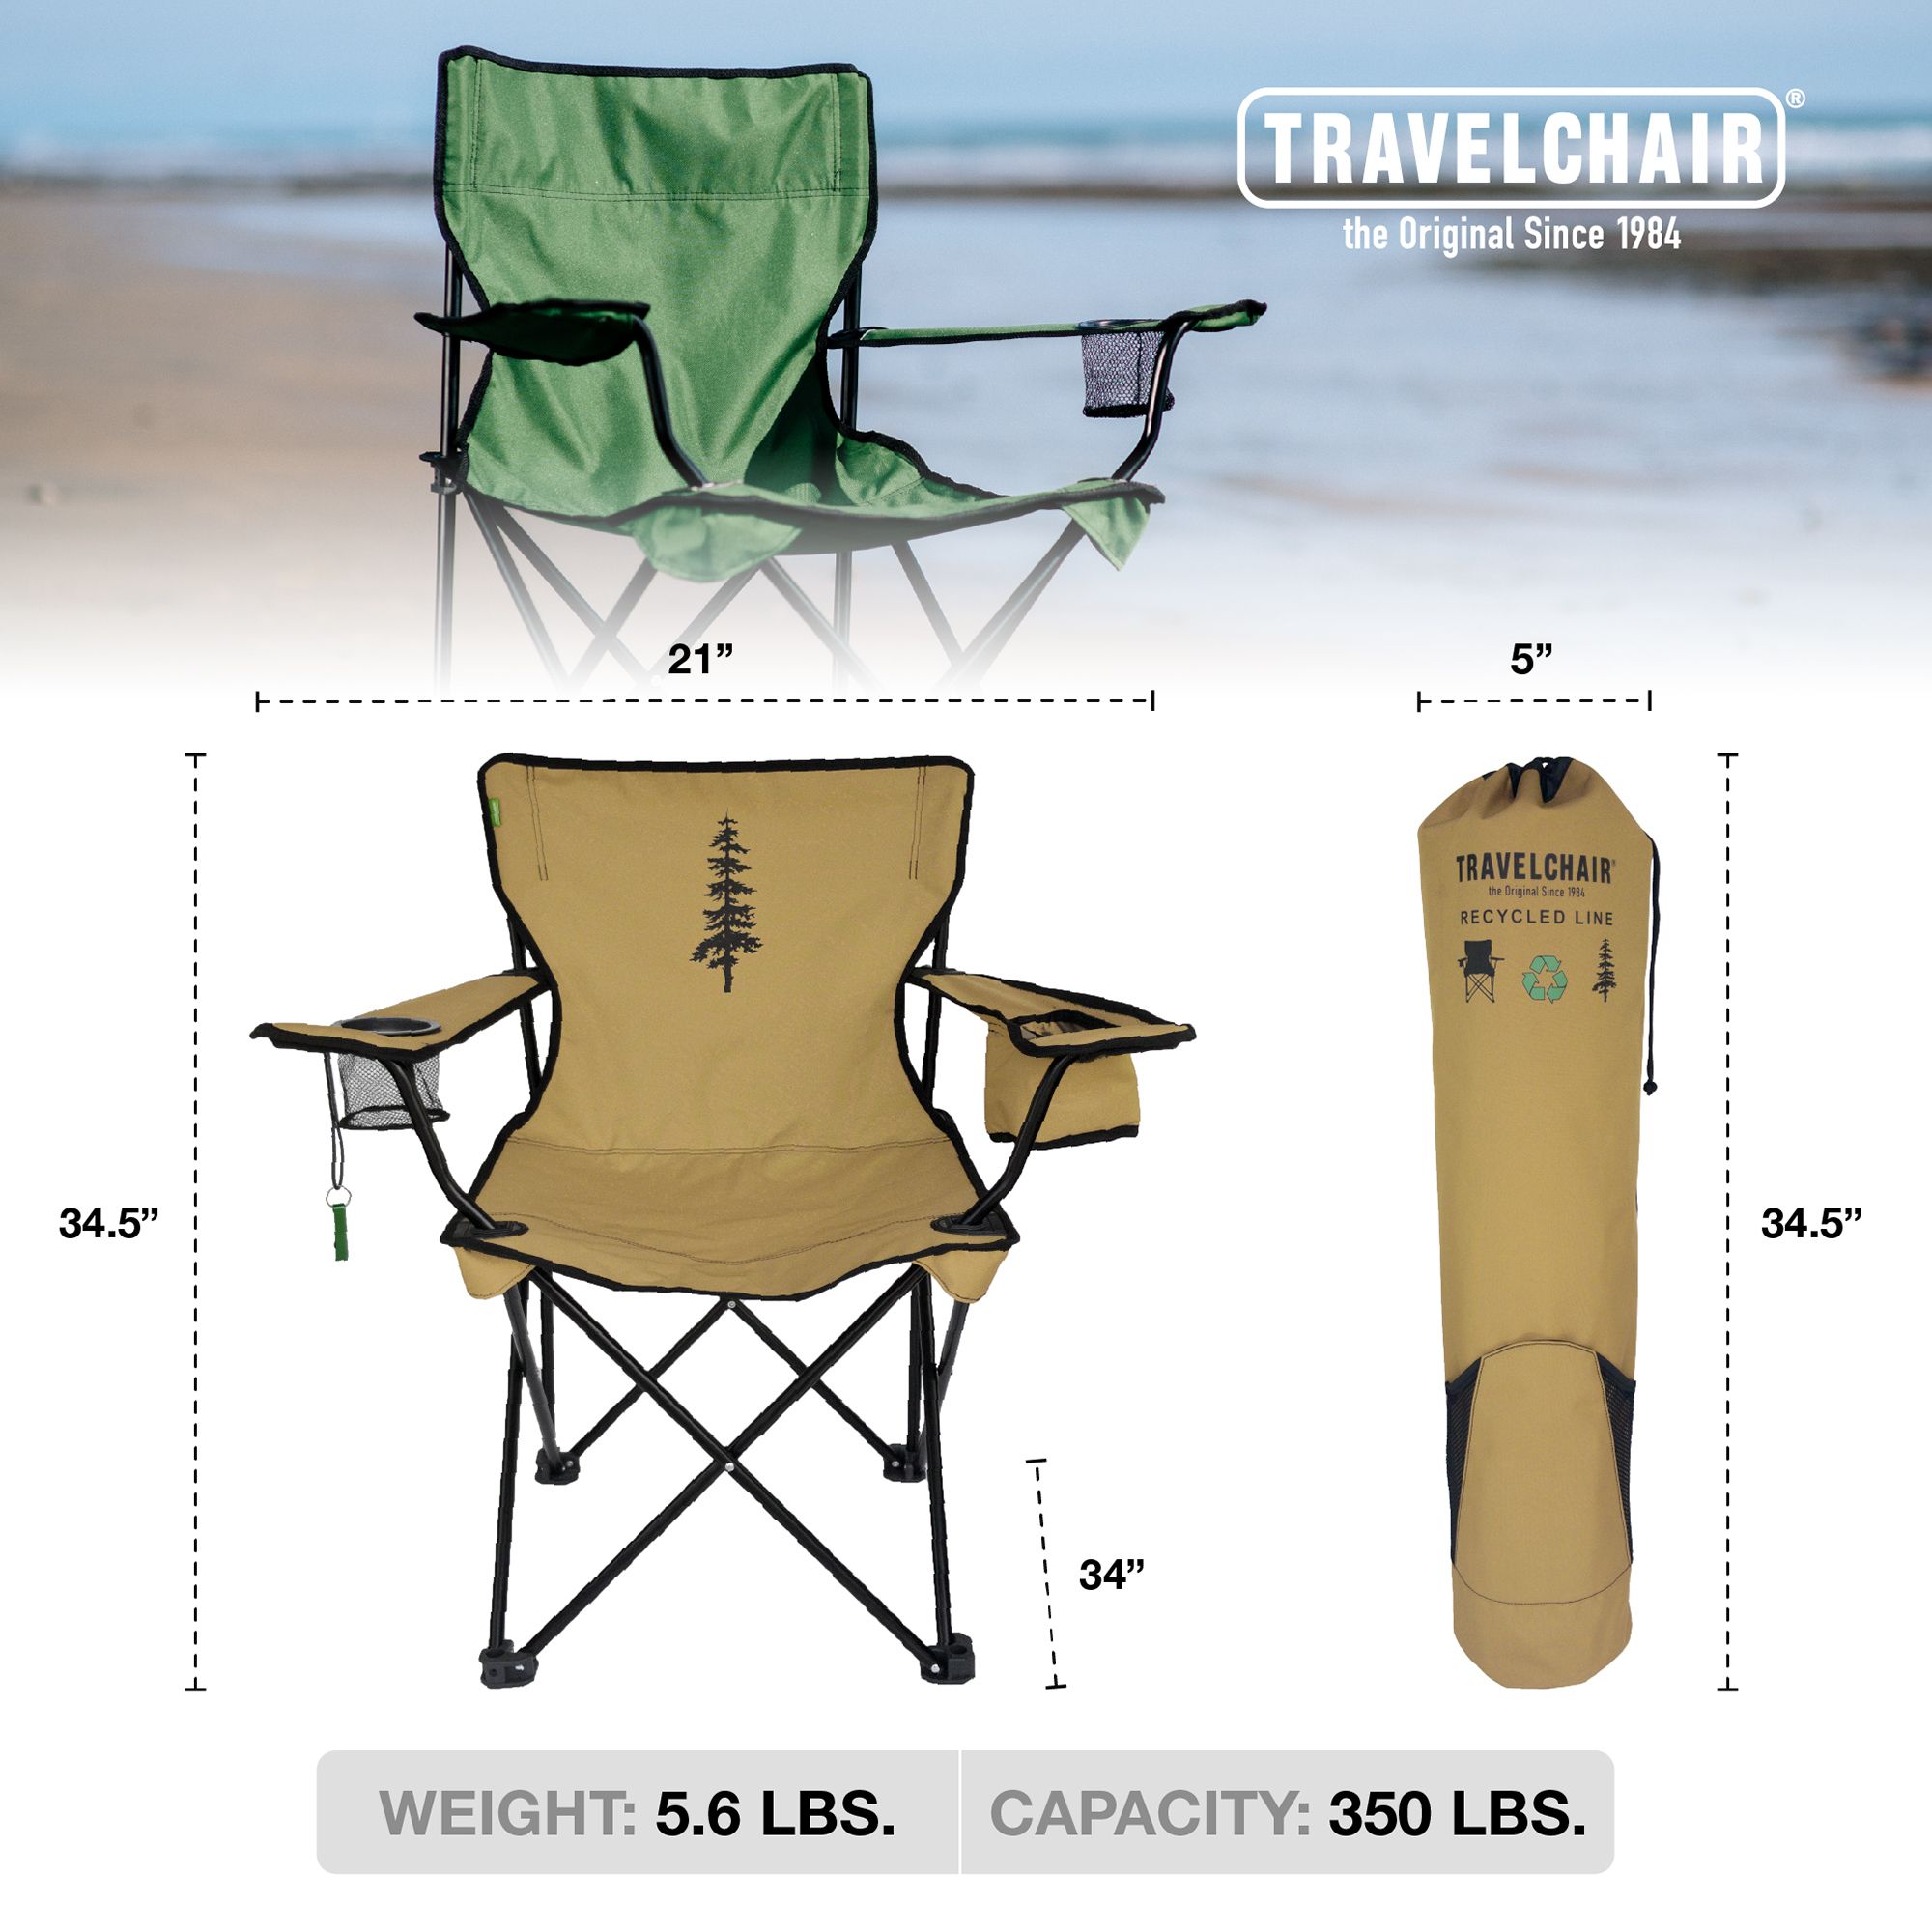 Travel Chair C-Series Rider Chair with Repreve